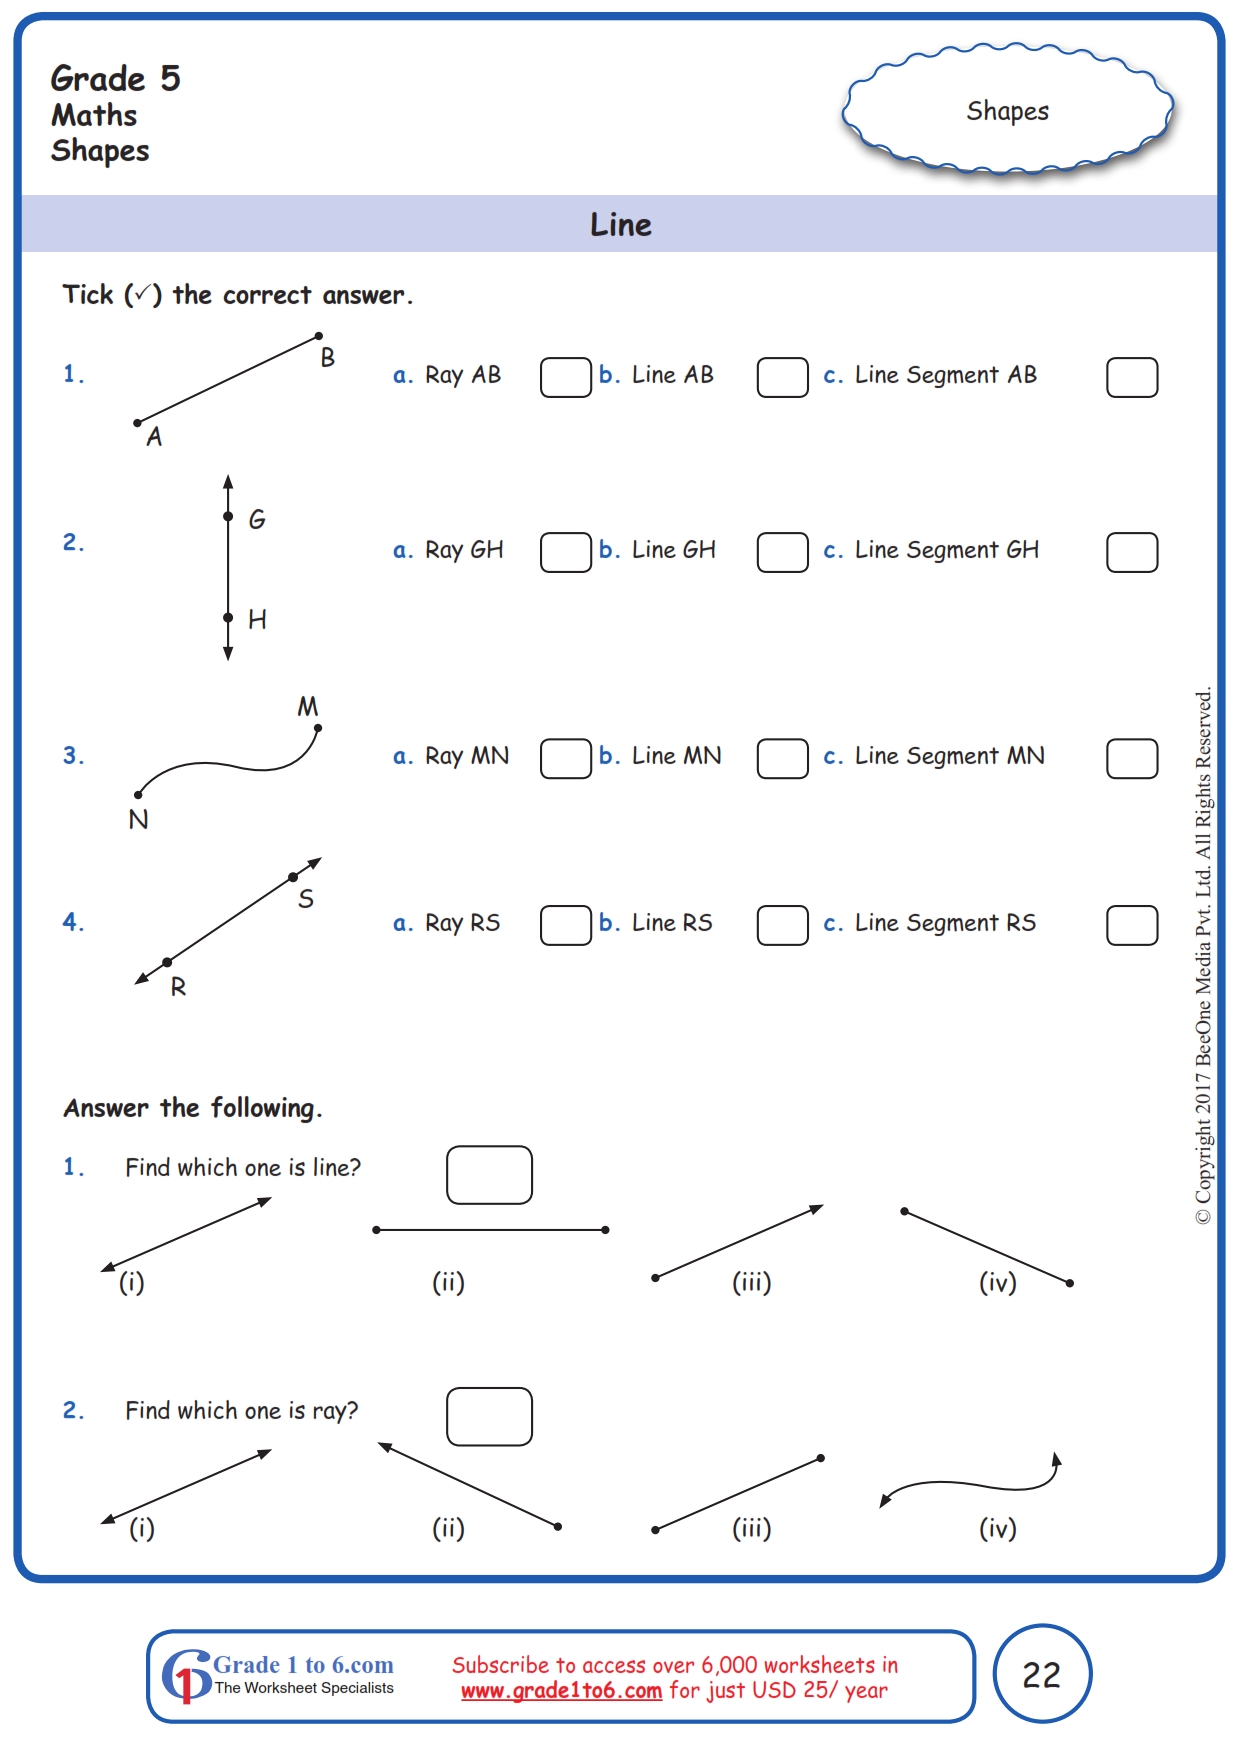 lines-rays-and-line-segments-worksheets-www-grade1to6